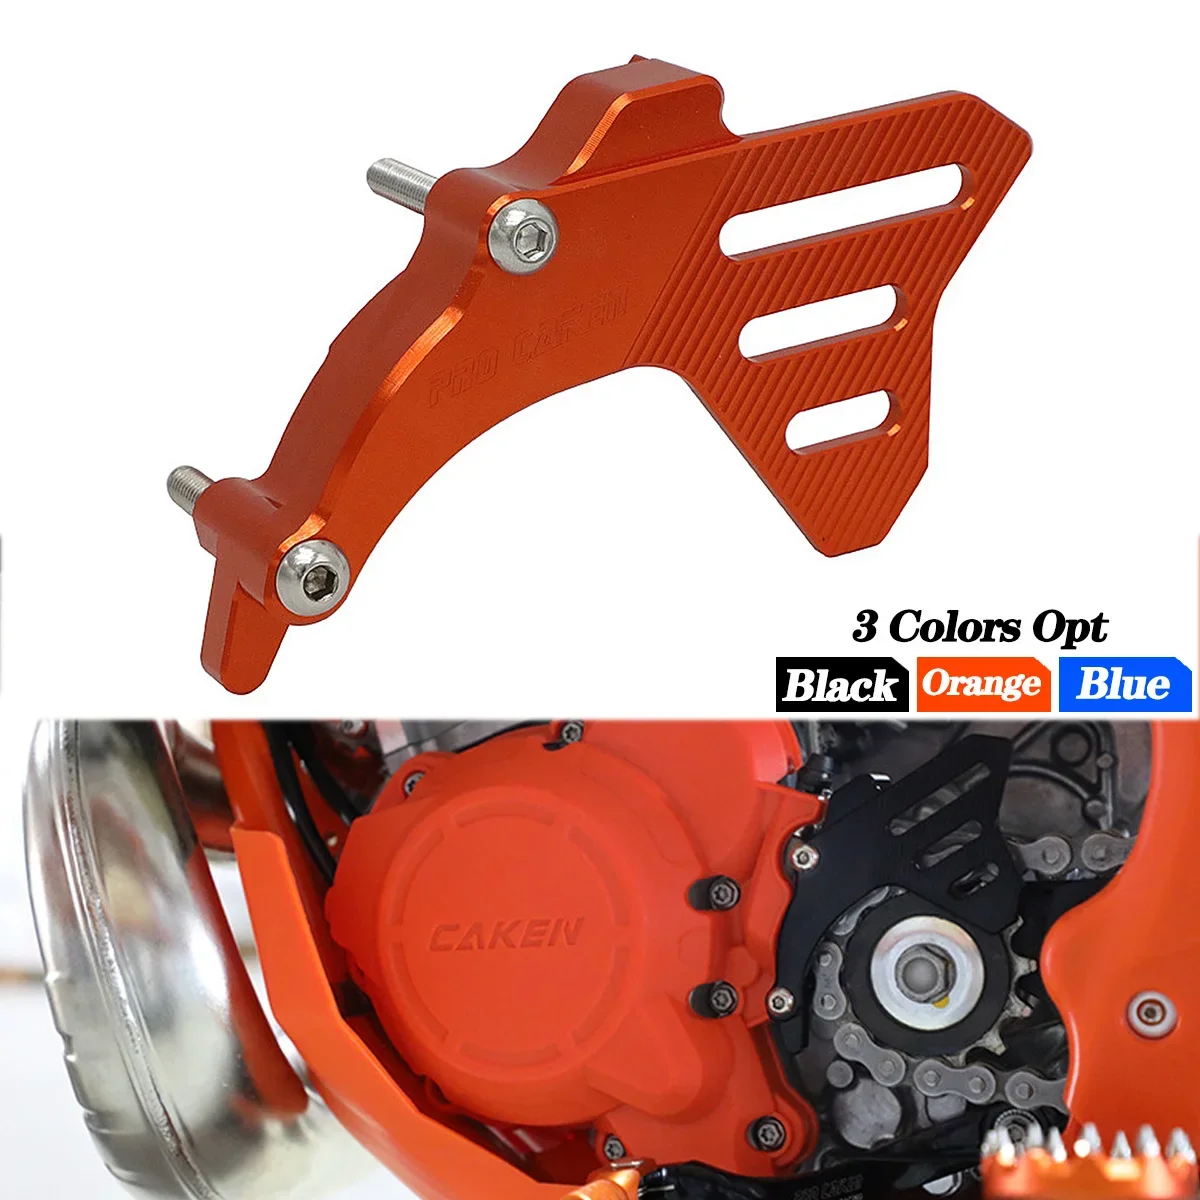 

Front Sprocket Cover Case Saver Protector Chain Guard For KTM SX SXF EXC EXC-F XC XCF XCW TPI FC TE TX 250 300 350 2017-2022